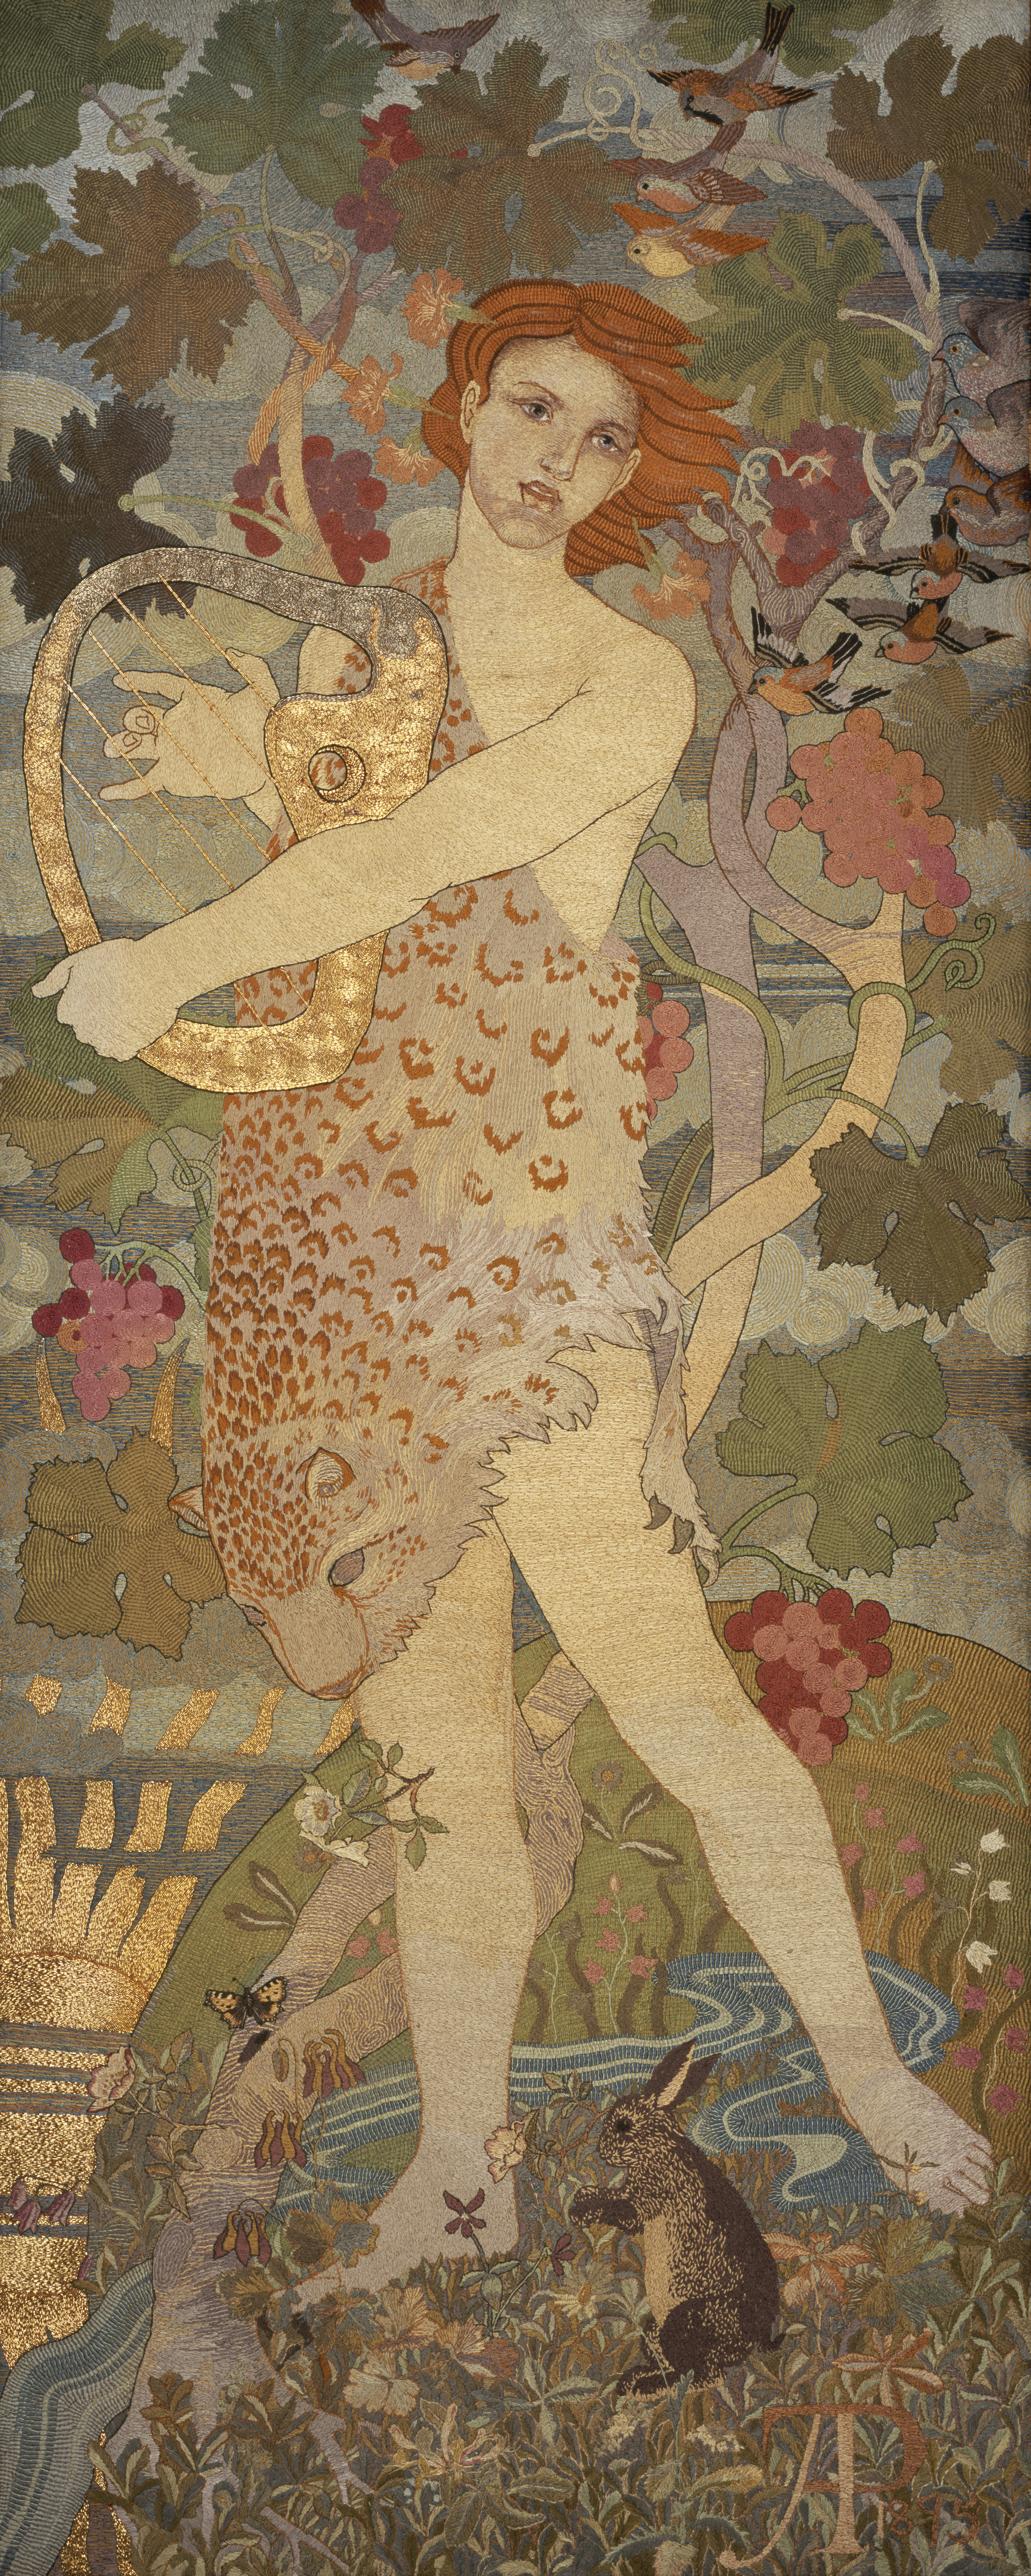 The Progress of a Soul: The Entrance by Phoebe Anna Traquair - 1895 - 180.67 x 71.20 cm National Galleries of Scotland